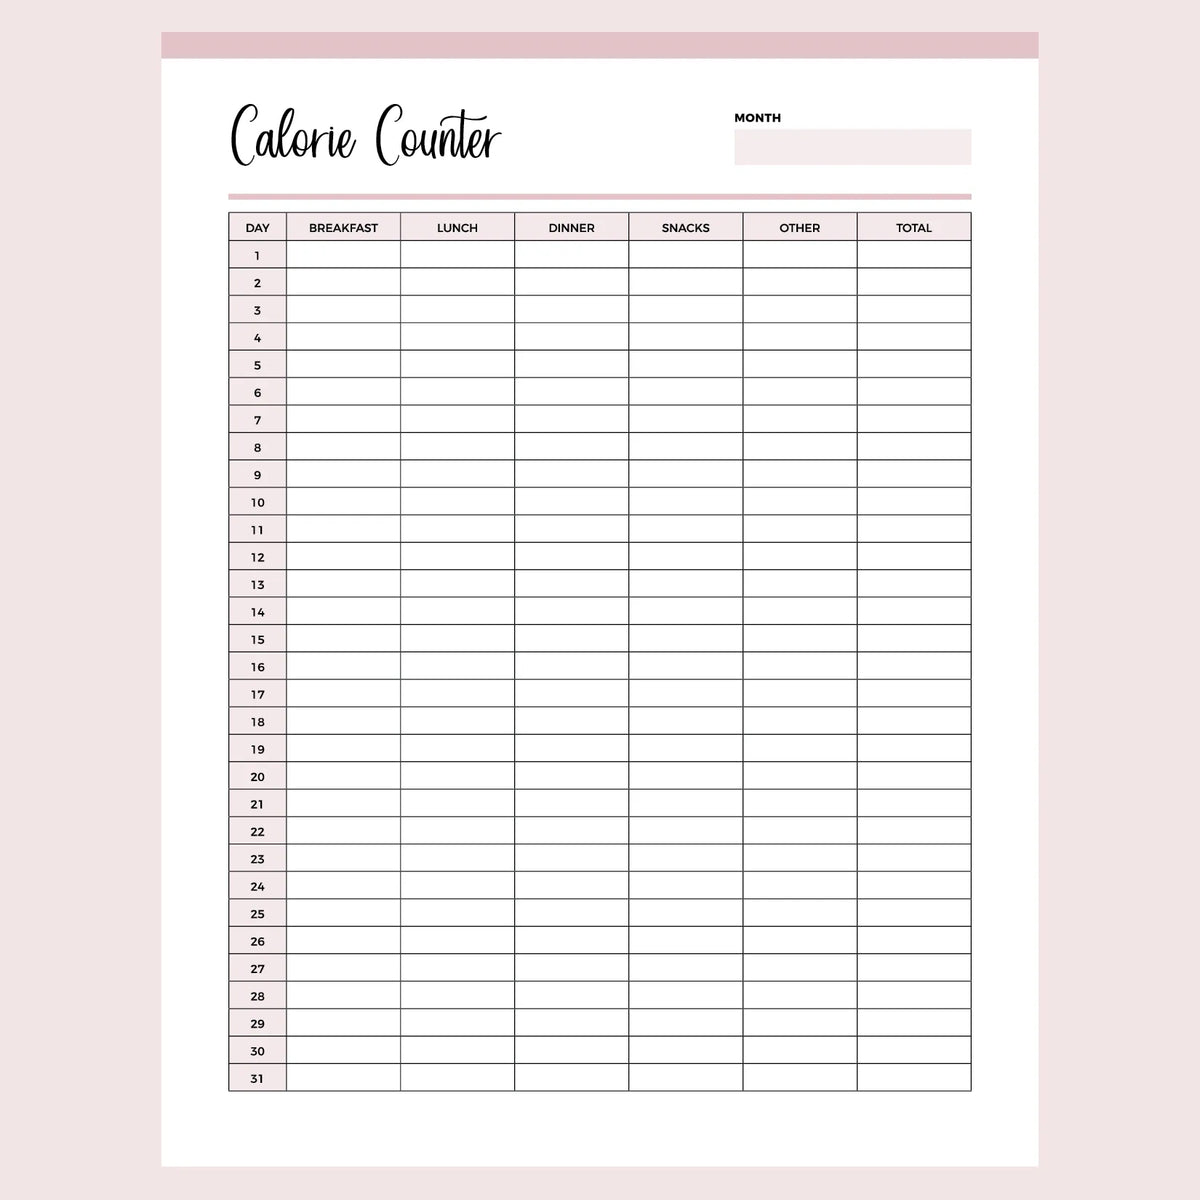 Download Free Calorie Counter PDF - World of Printables